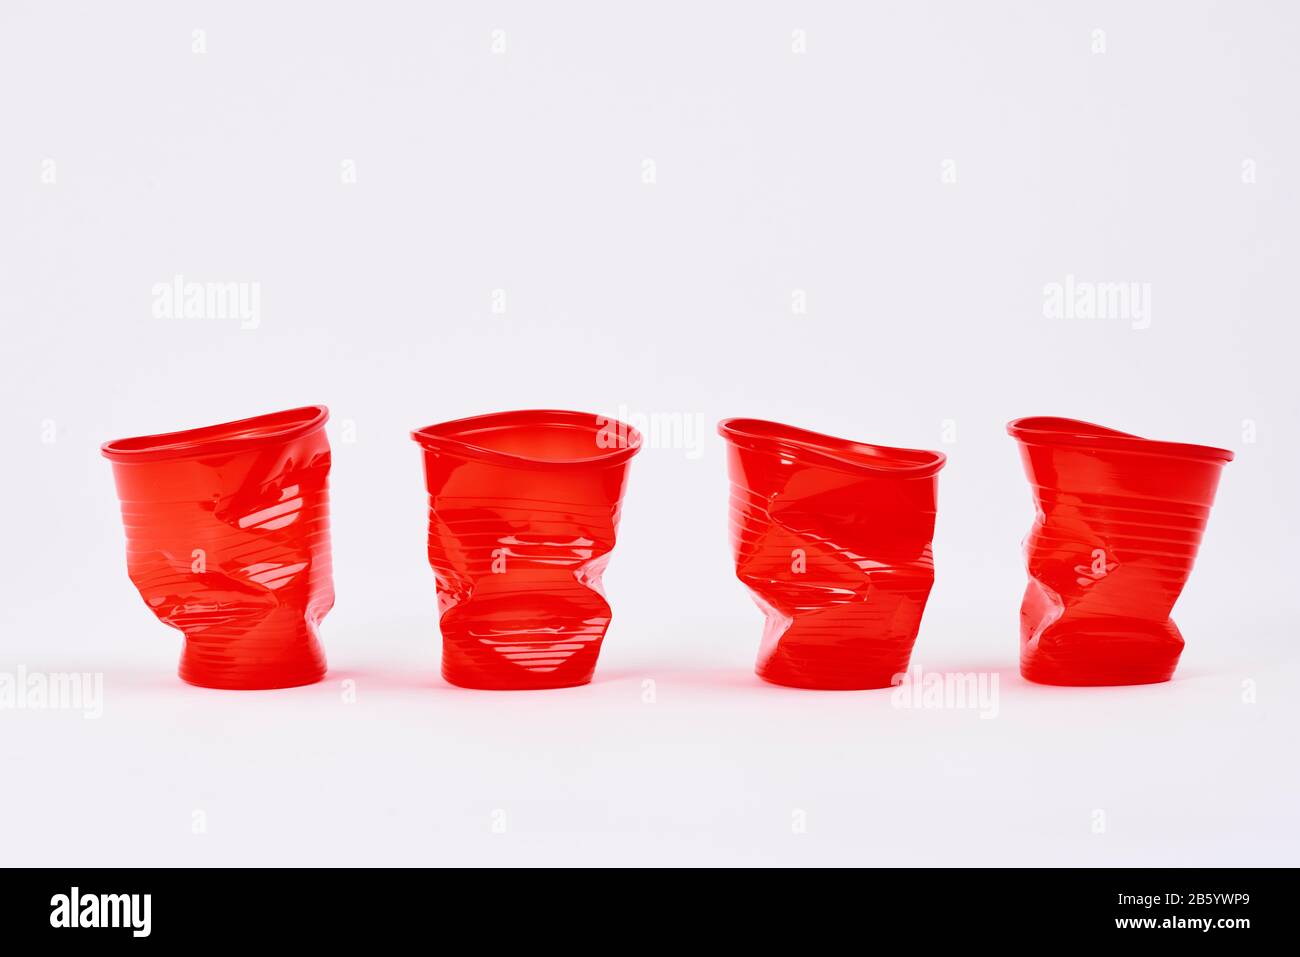 https://c8.alamy.com/comp/2B5YWP9/four-disposable-plastic-cups-on-white-background-2B5YWP9.jpg